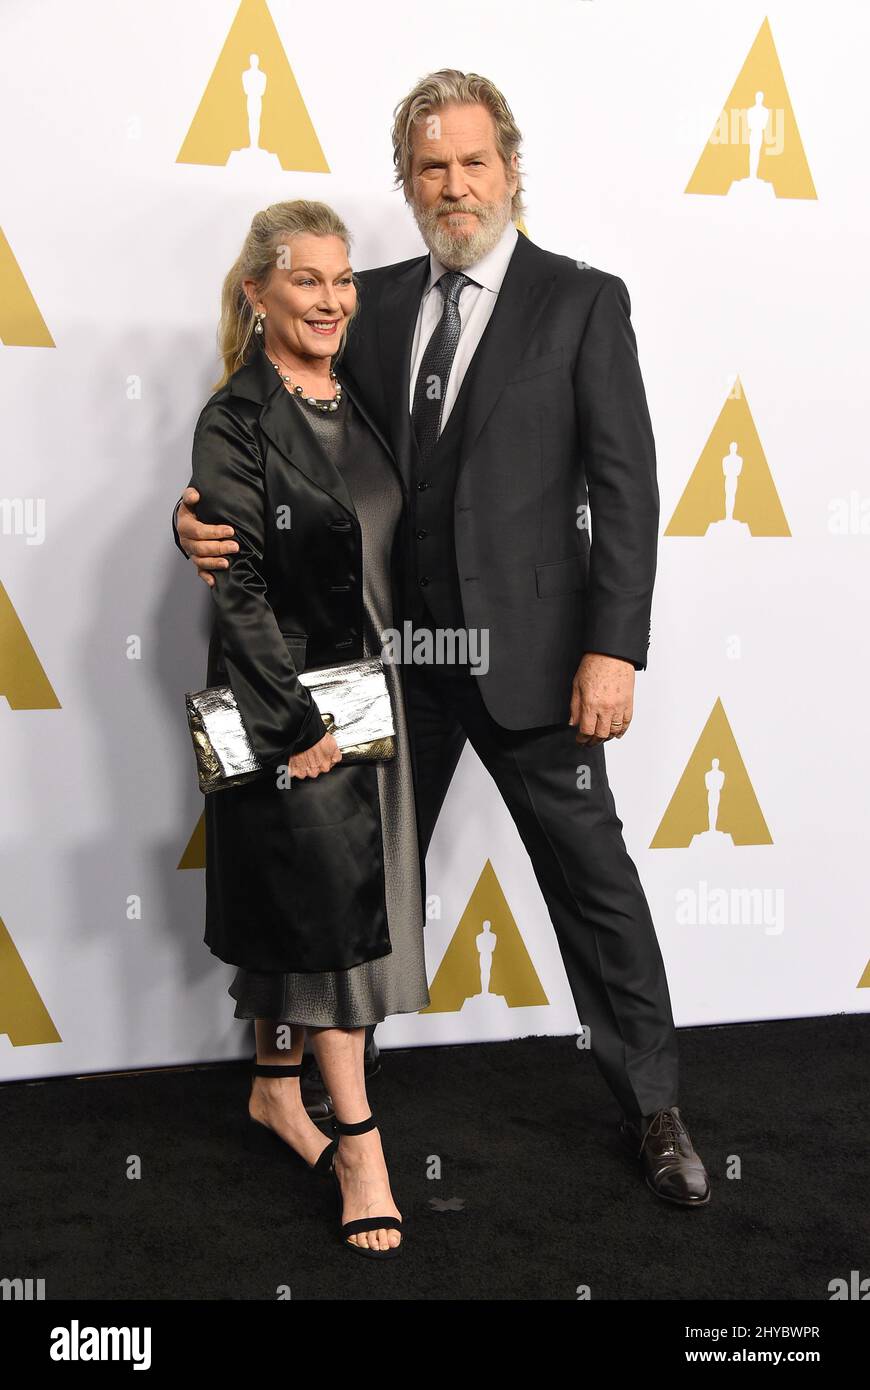 Jeff Bridges and Susan Bridges attending the 89th Annual Academy Awards Nominee Luncheon held at the Beverly Hilton Hotel in Los Angeles, California Stock Photo